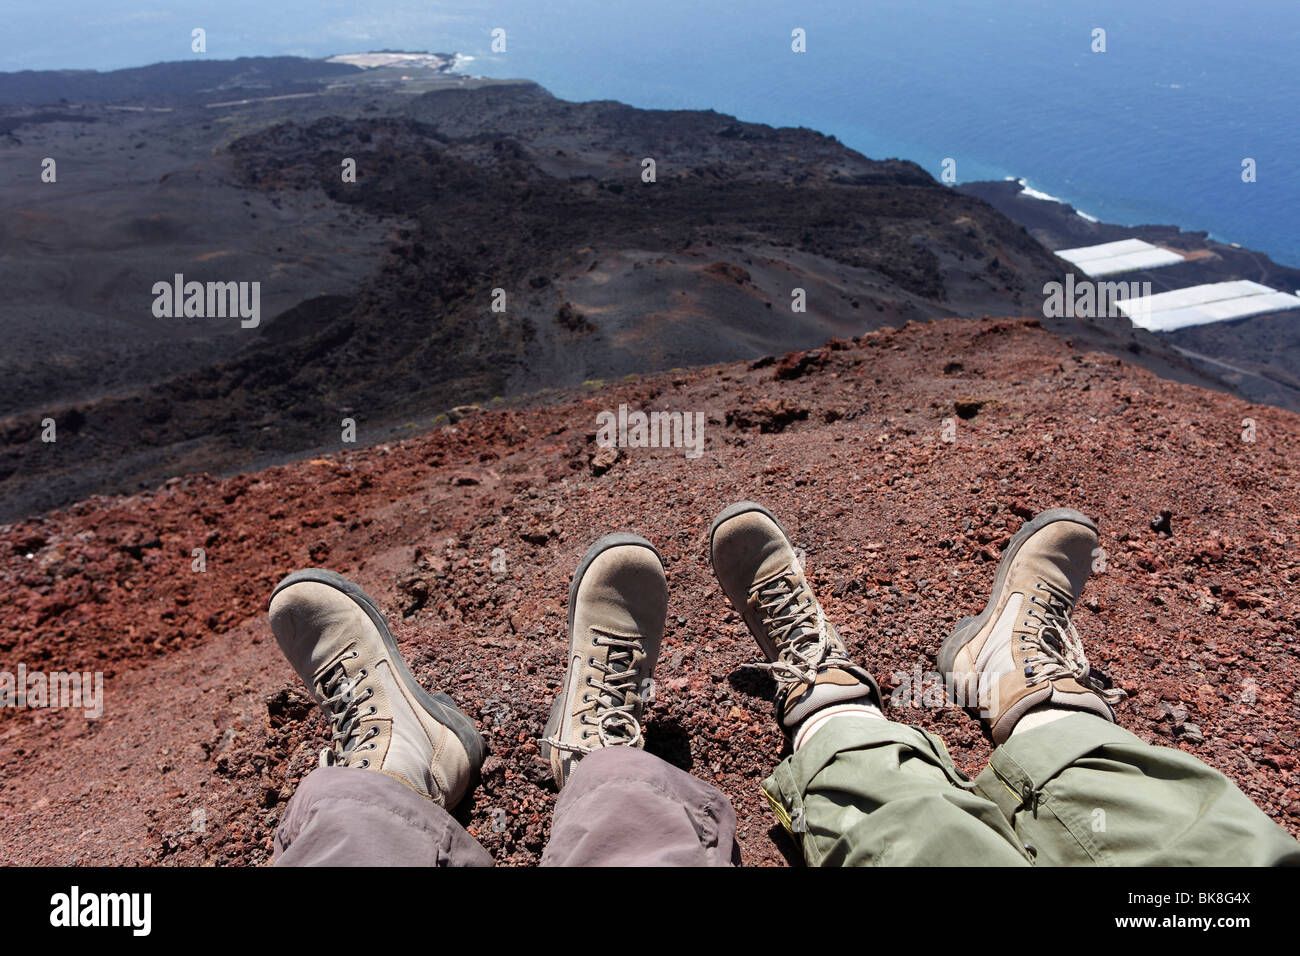 Feet with walking boots, hikers taking a break on the Teneguía Volcano, La Palma, Canary Islands, Spain, Europe Stock Photo